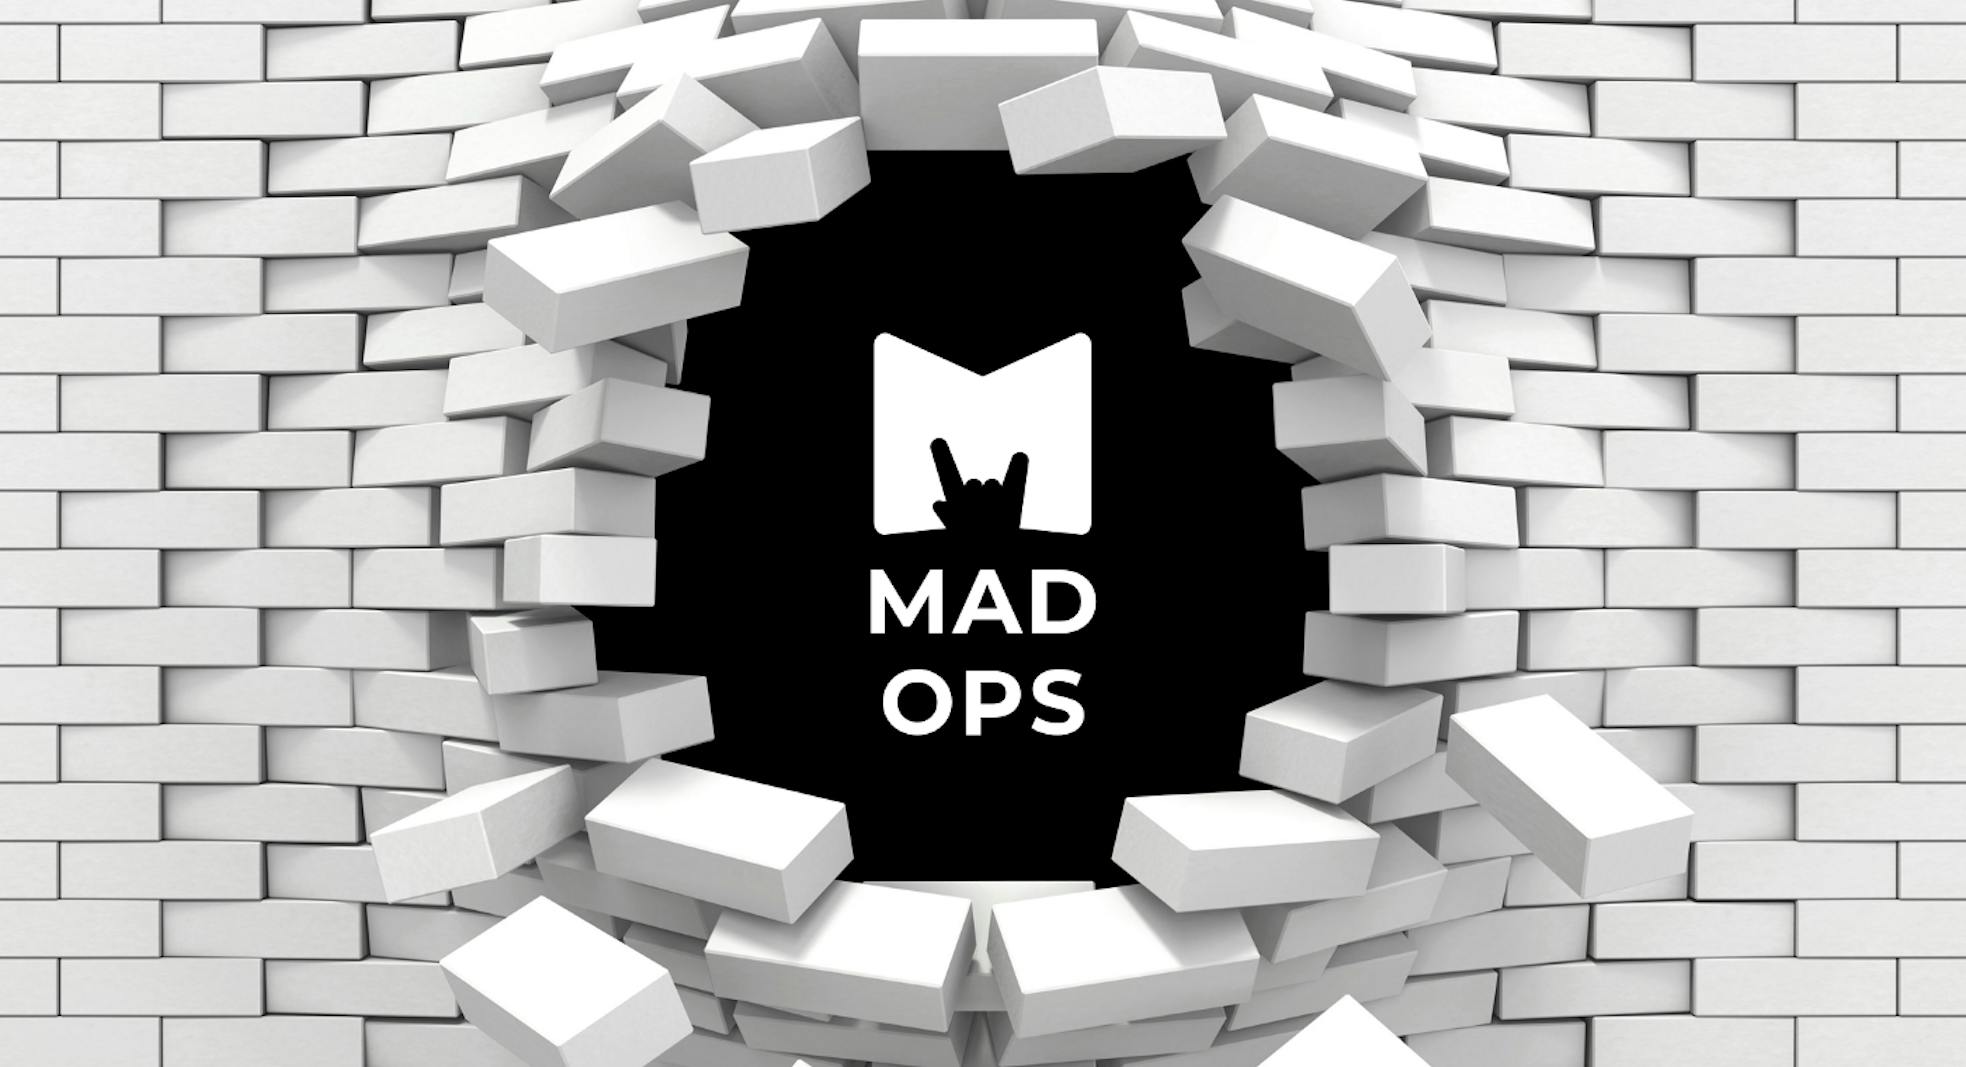 DevOps at Mad Devs: a List of Skills & Practices We Use to Train Our DevOps Internally